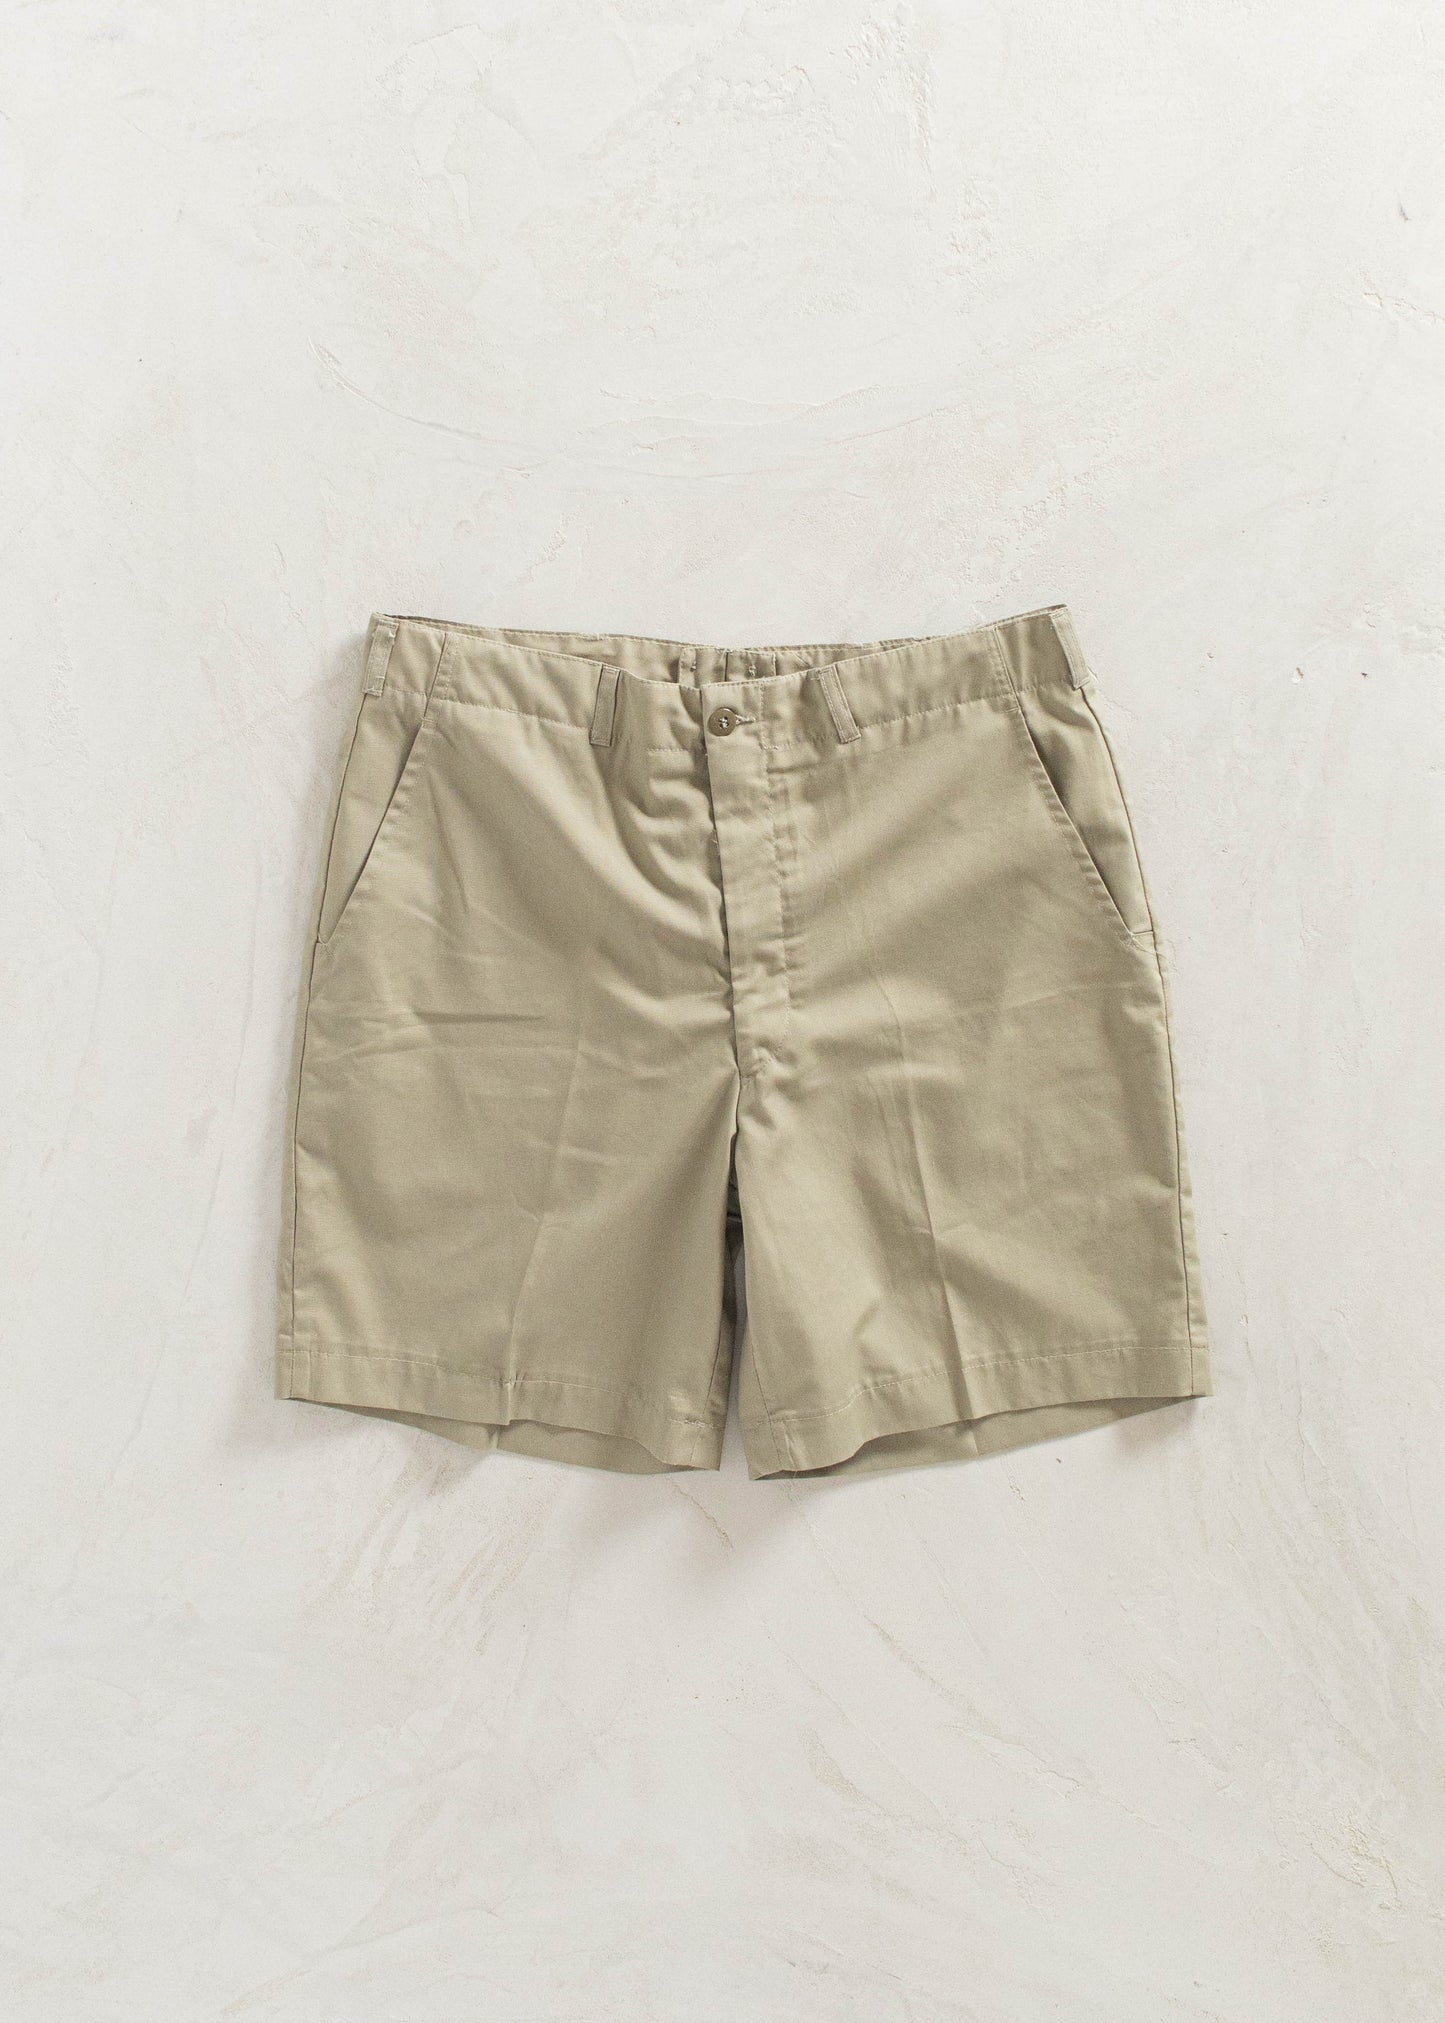 Vintage 1970s French Military Shorts Size Women's 32 Men's 34